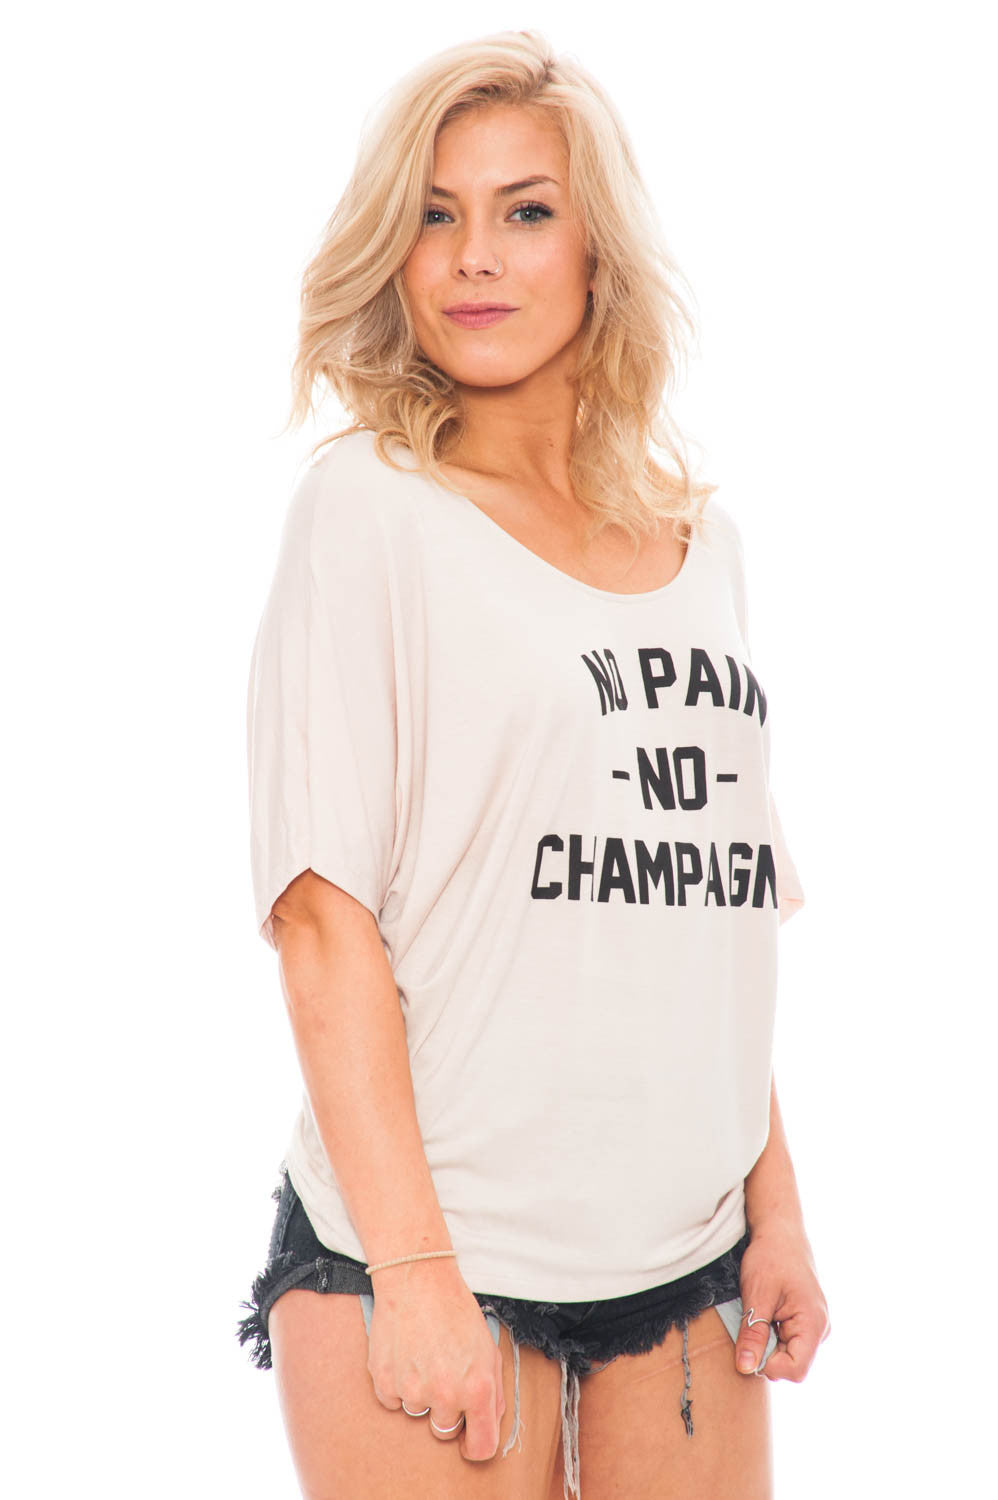 Tee - No Pain No Champagne Batwing Top